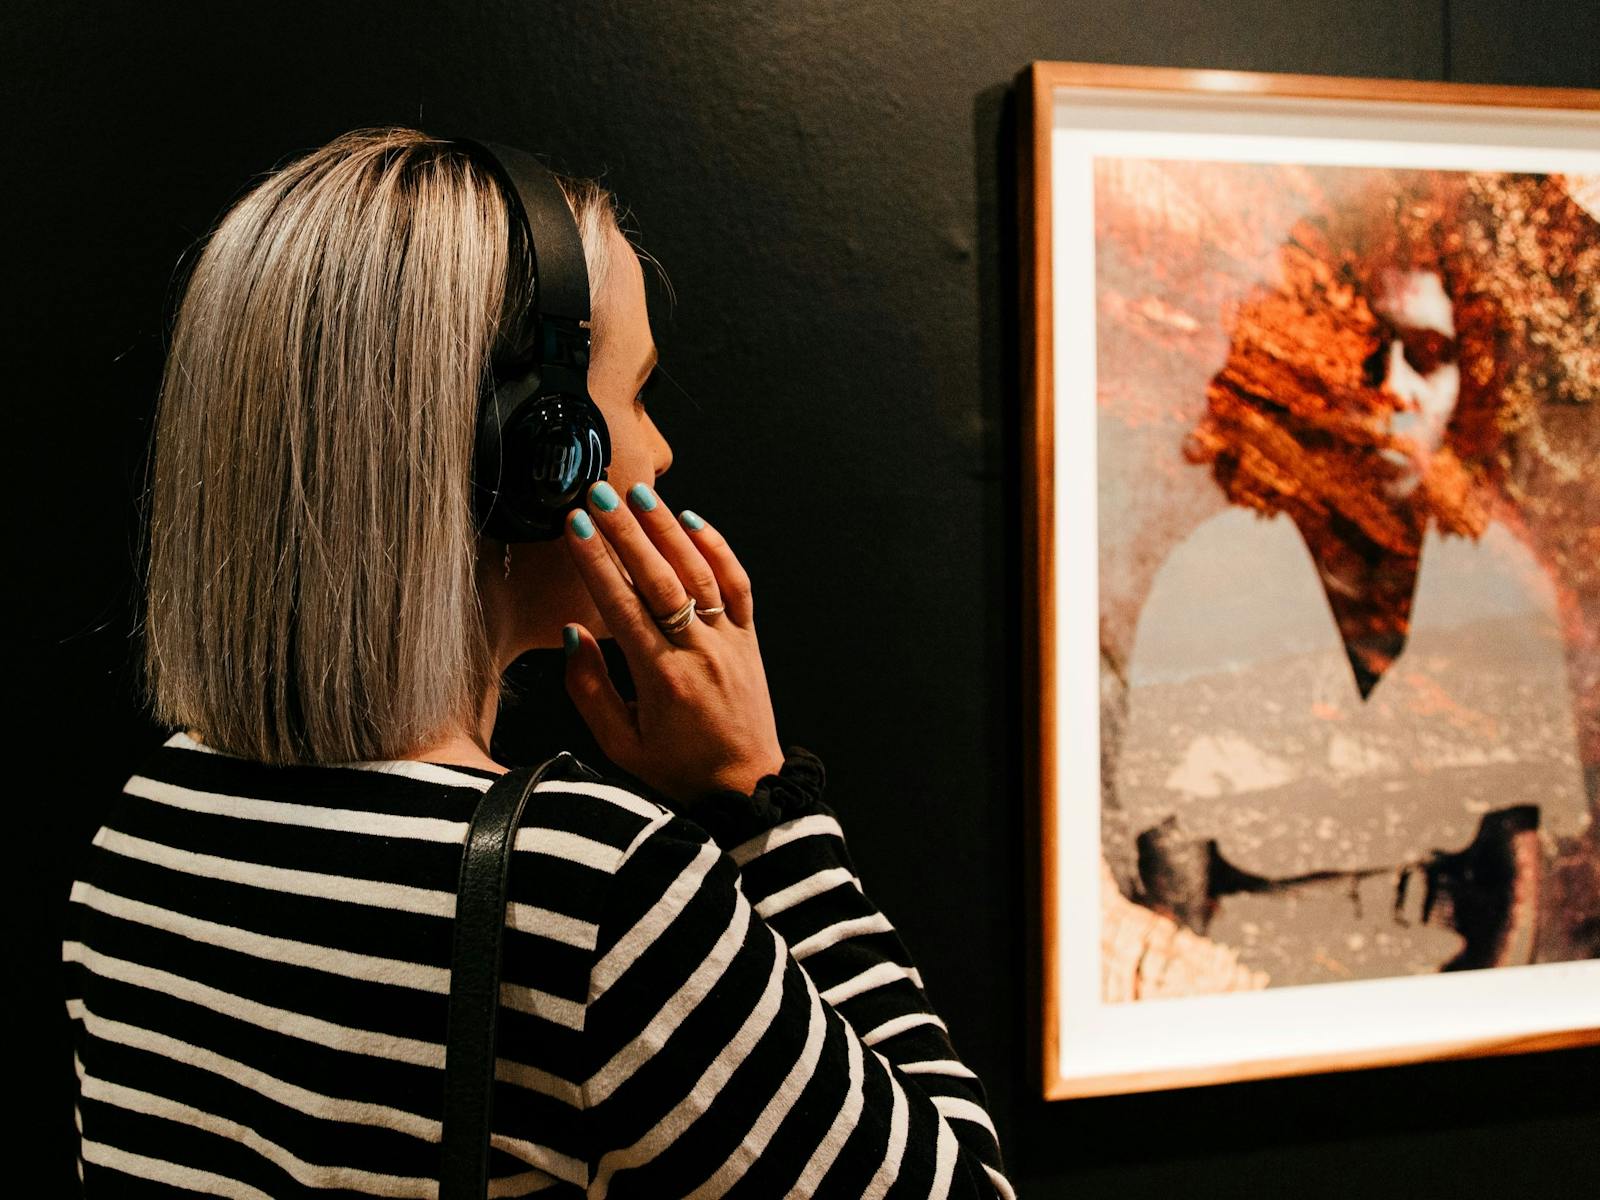 A woman viewing a photographic work by Jahkarli Romanis, while listening to audio through headphones